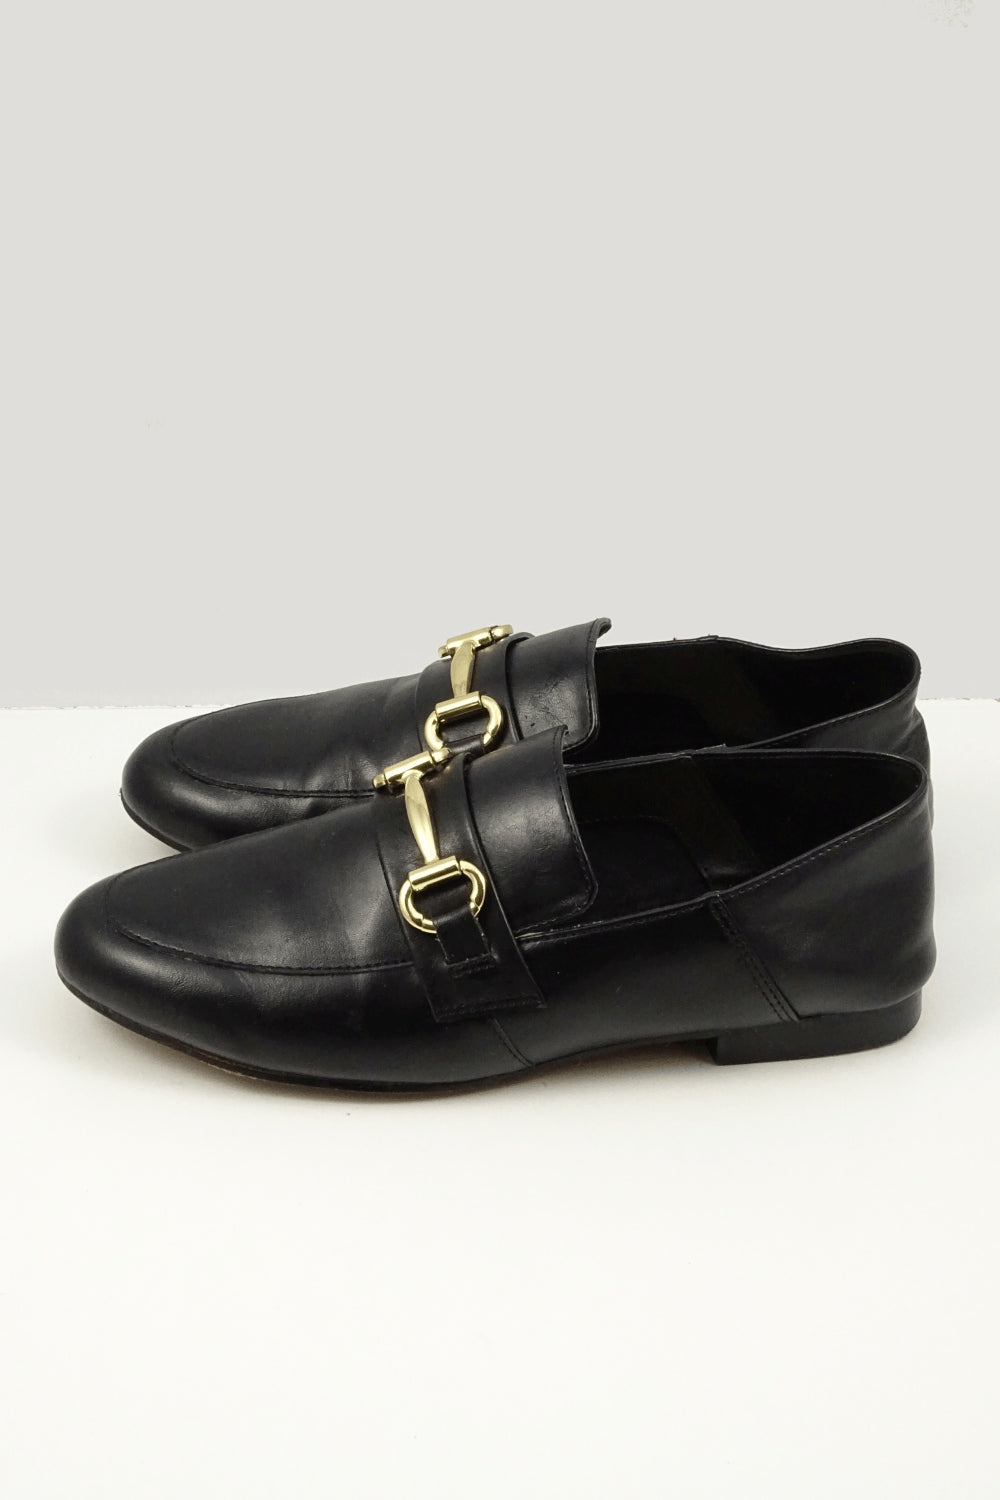 Black loafer with gold buckle detail. Synthetic Upper